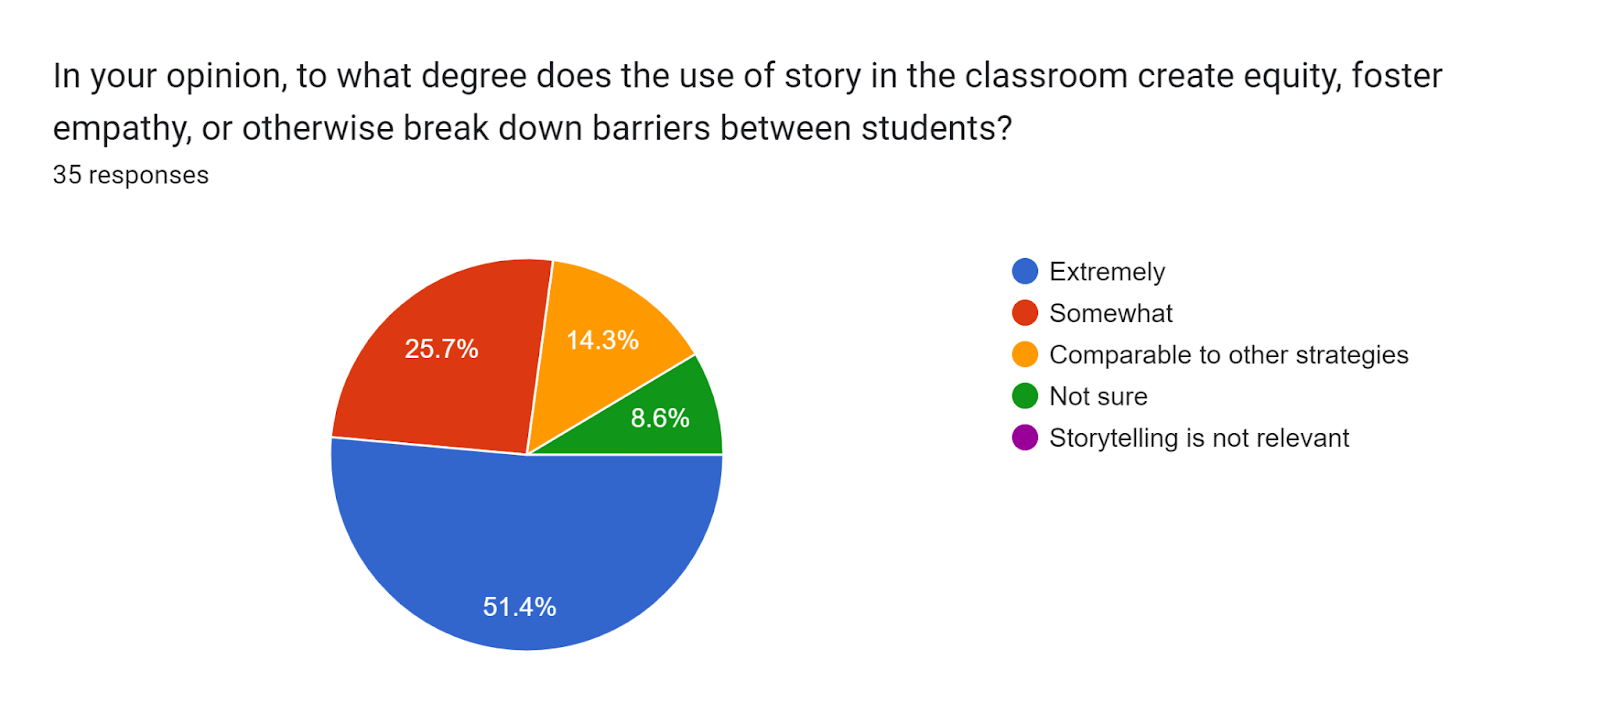 Forms response chart. Question title: In your opinion, to what degree does the use of story in the classroom create equity, foster empathy, or otherwise break down barriers between students? . Number of responses: 35 responses.